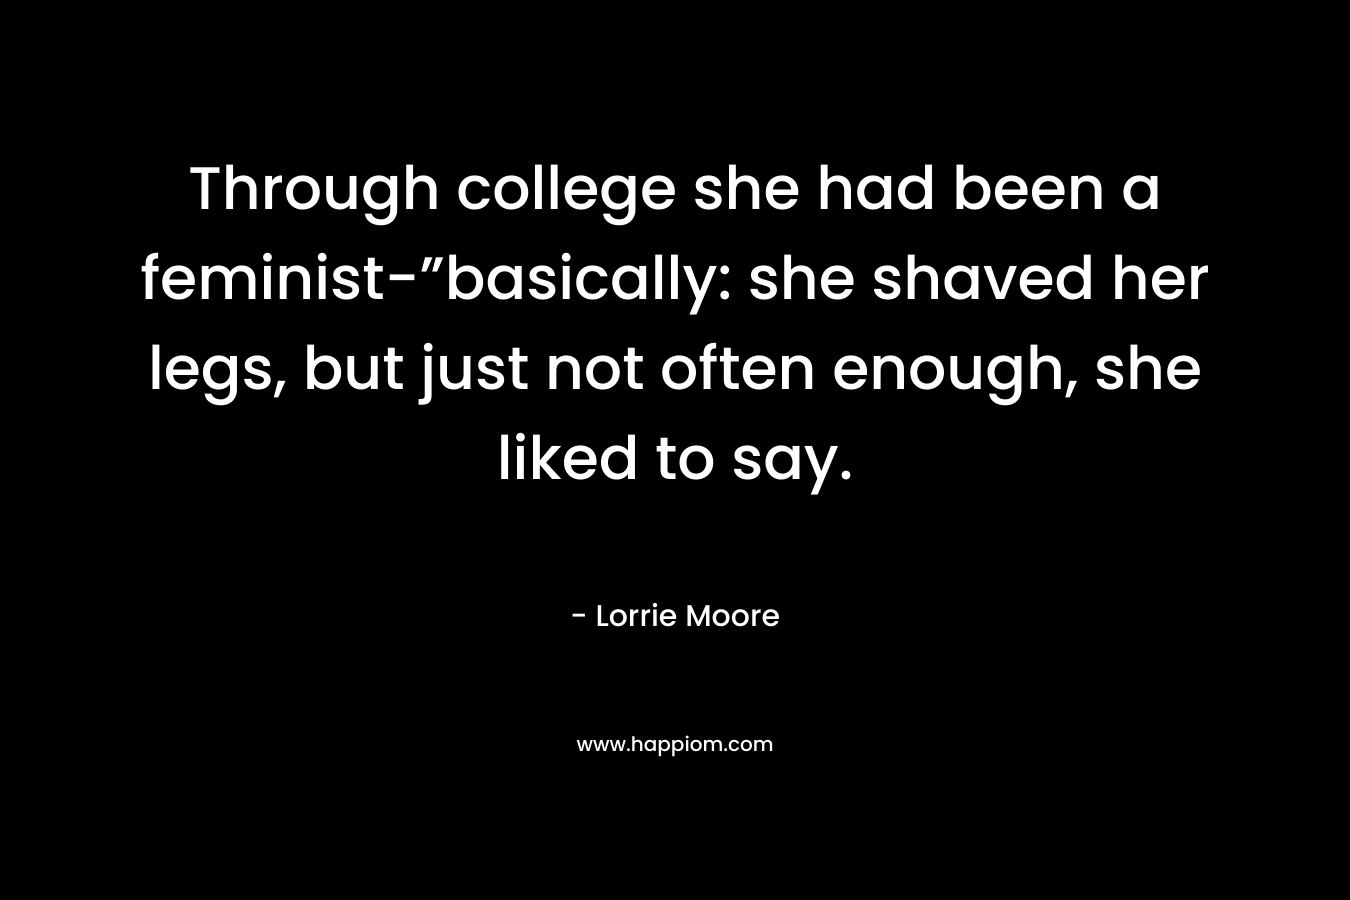 Through college she had been a feminist-”basically: she shaved her legs, but just not often enough, she liked to say.